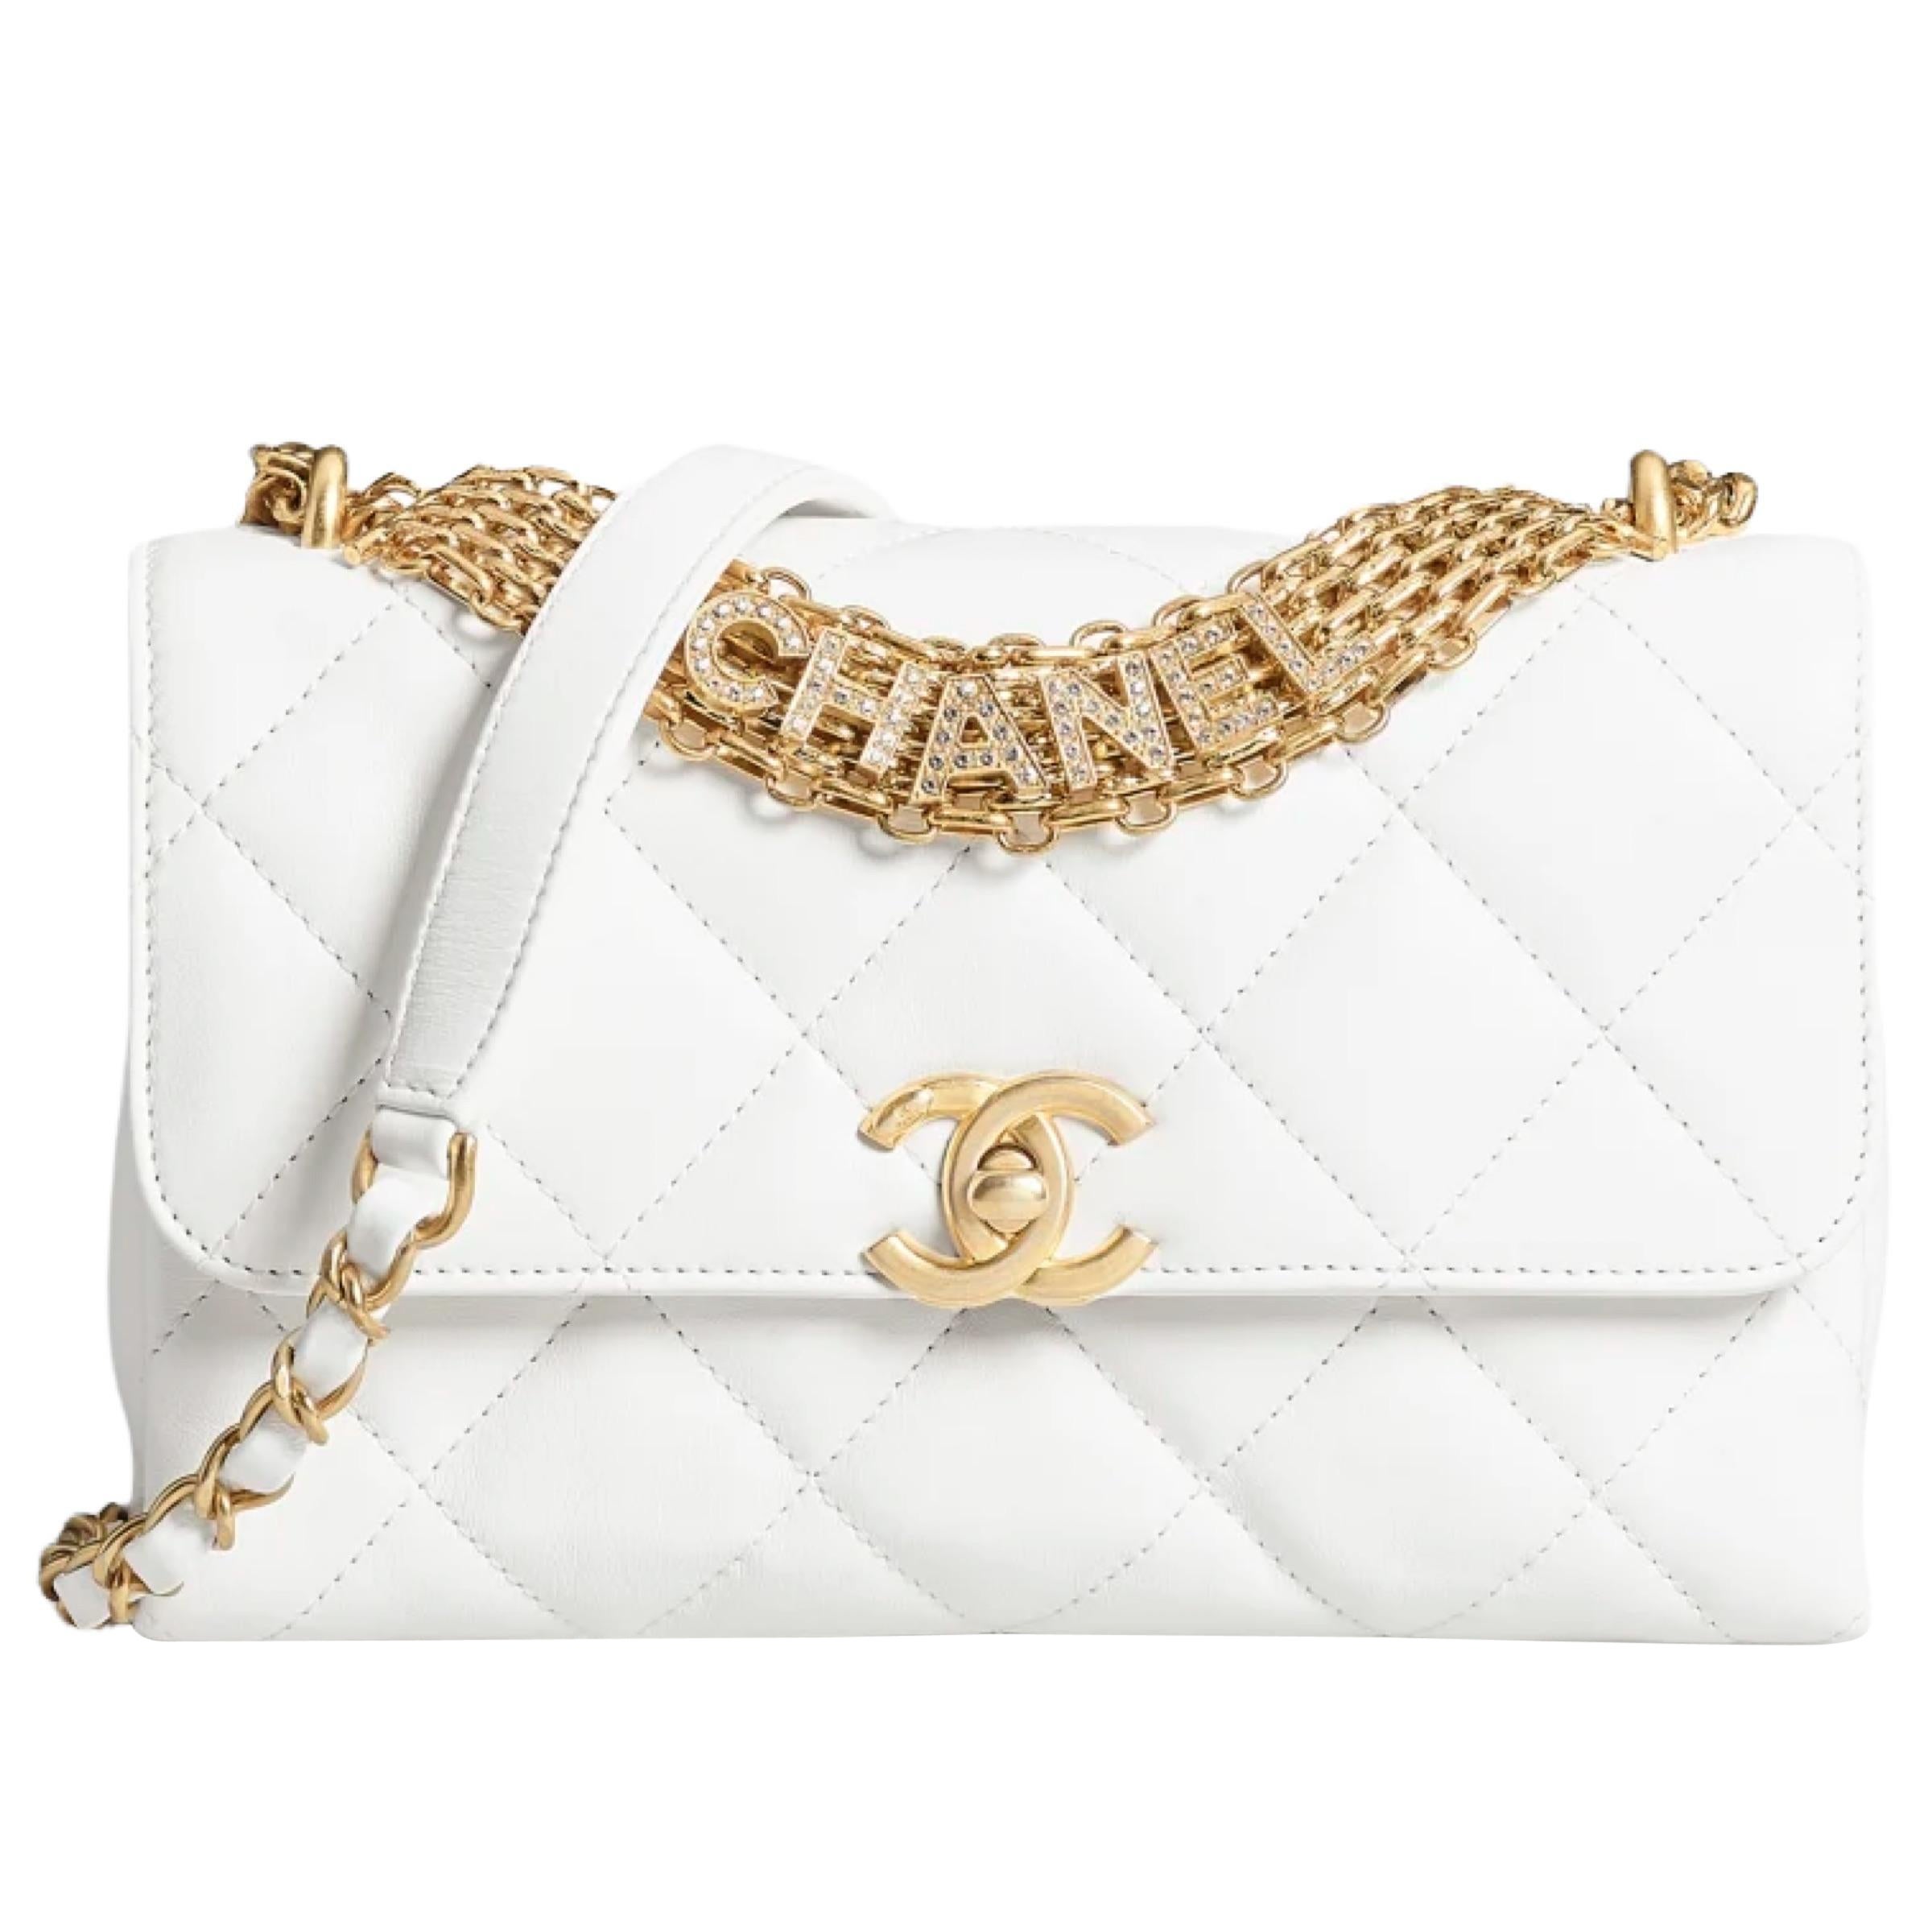 NEW Chanel White Small Flap Bag Quilted Leather Crossbody Bag For Sale